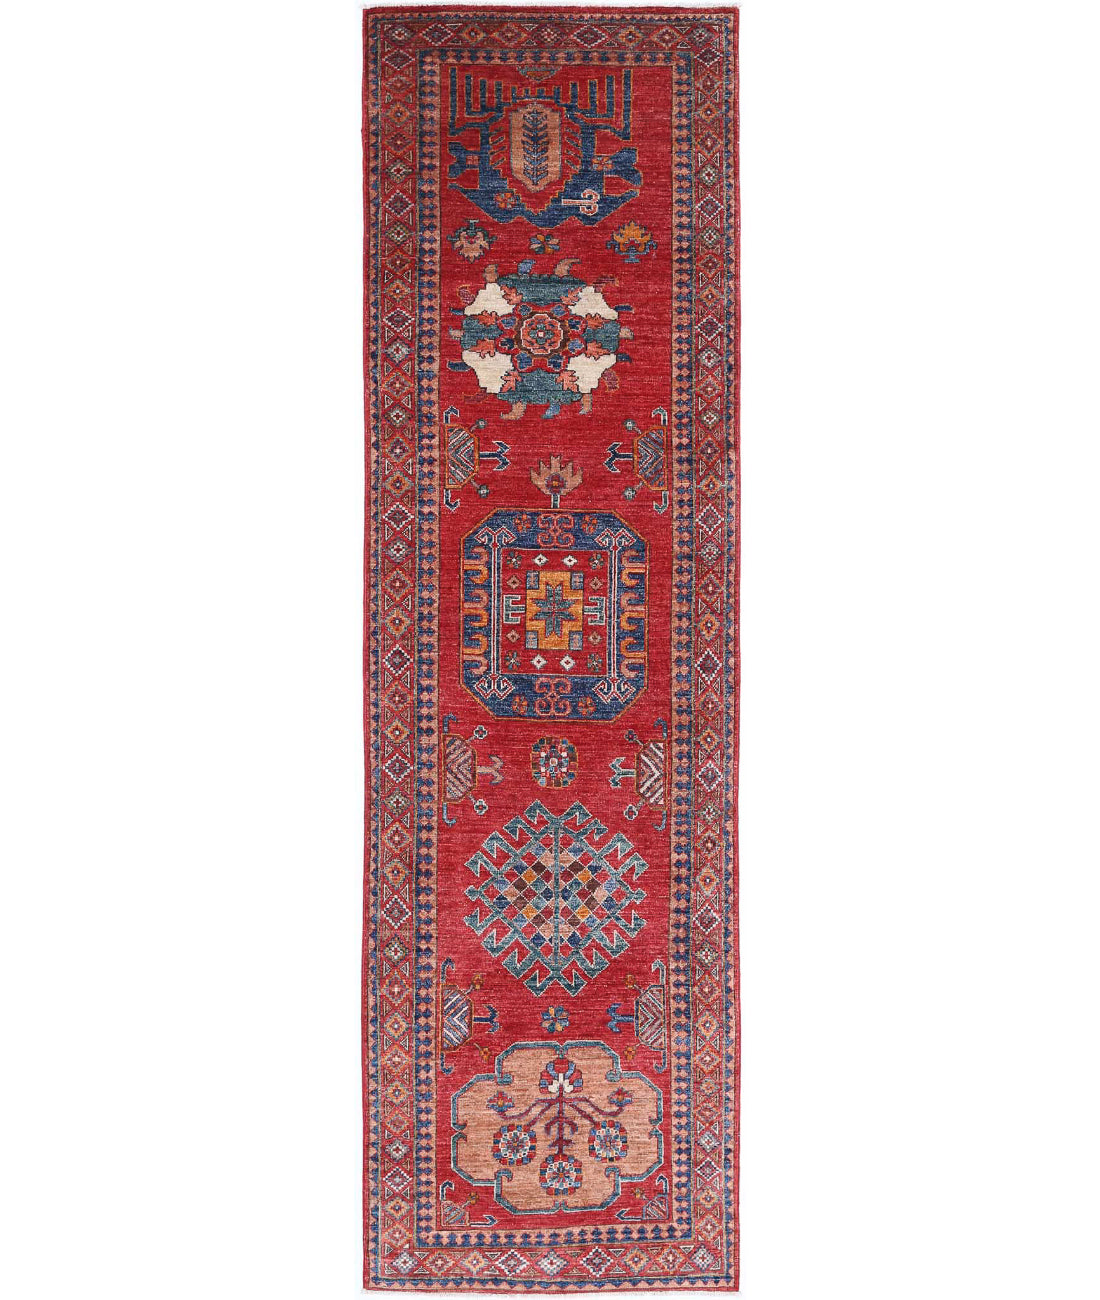 Hand Knotted Nomadic Caucasian Humna Wool Rug - 2'8'' x 9'11'' 2'8'' x 9'11'' (80 X 298) / Red / Taupe